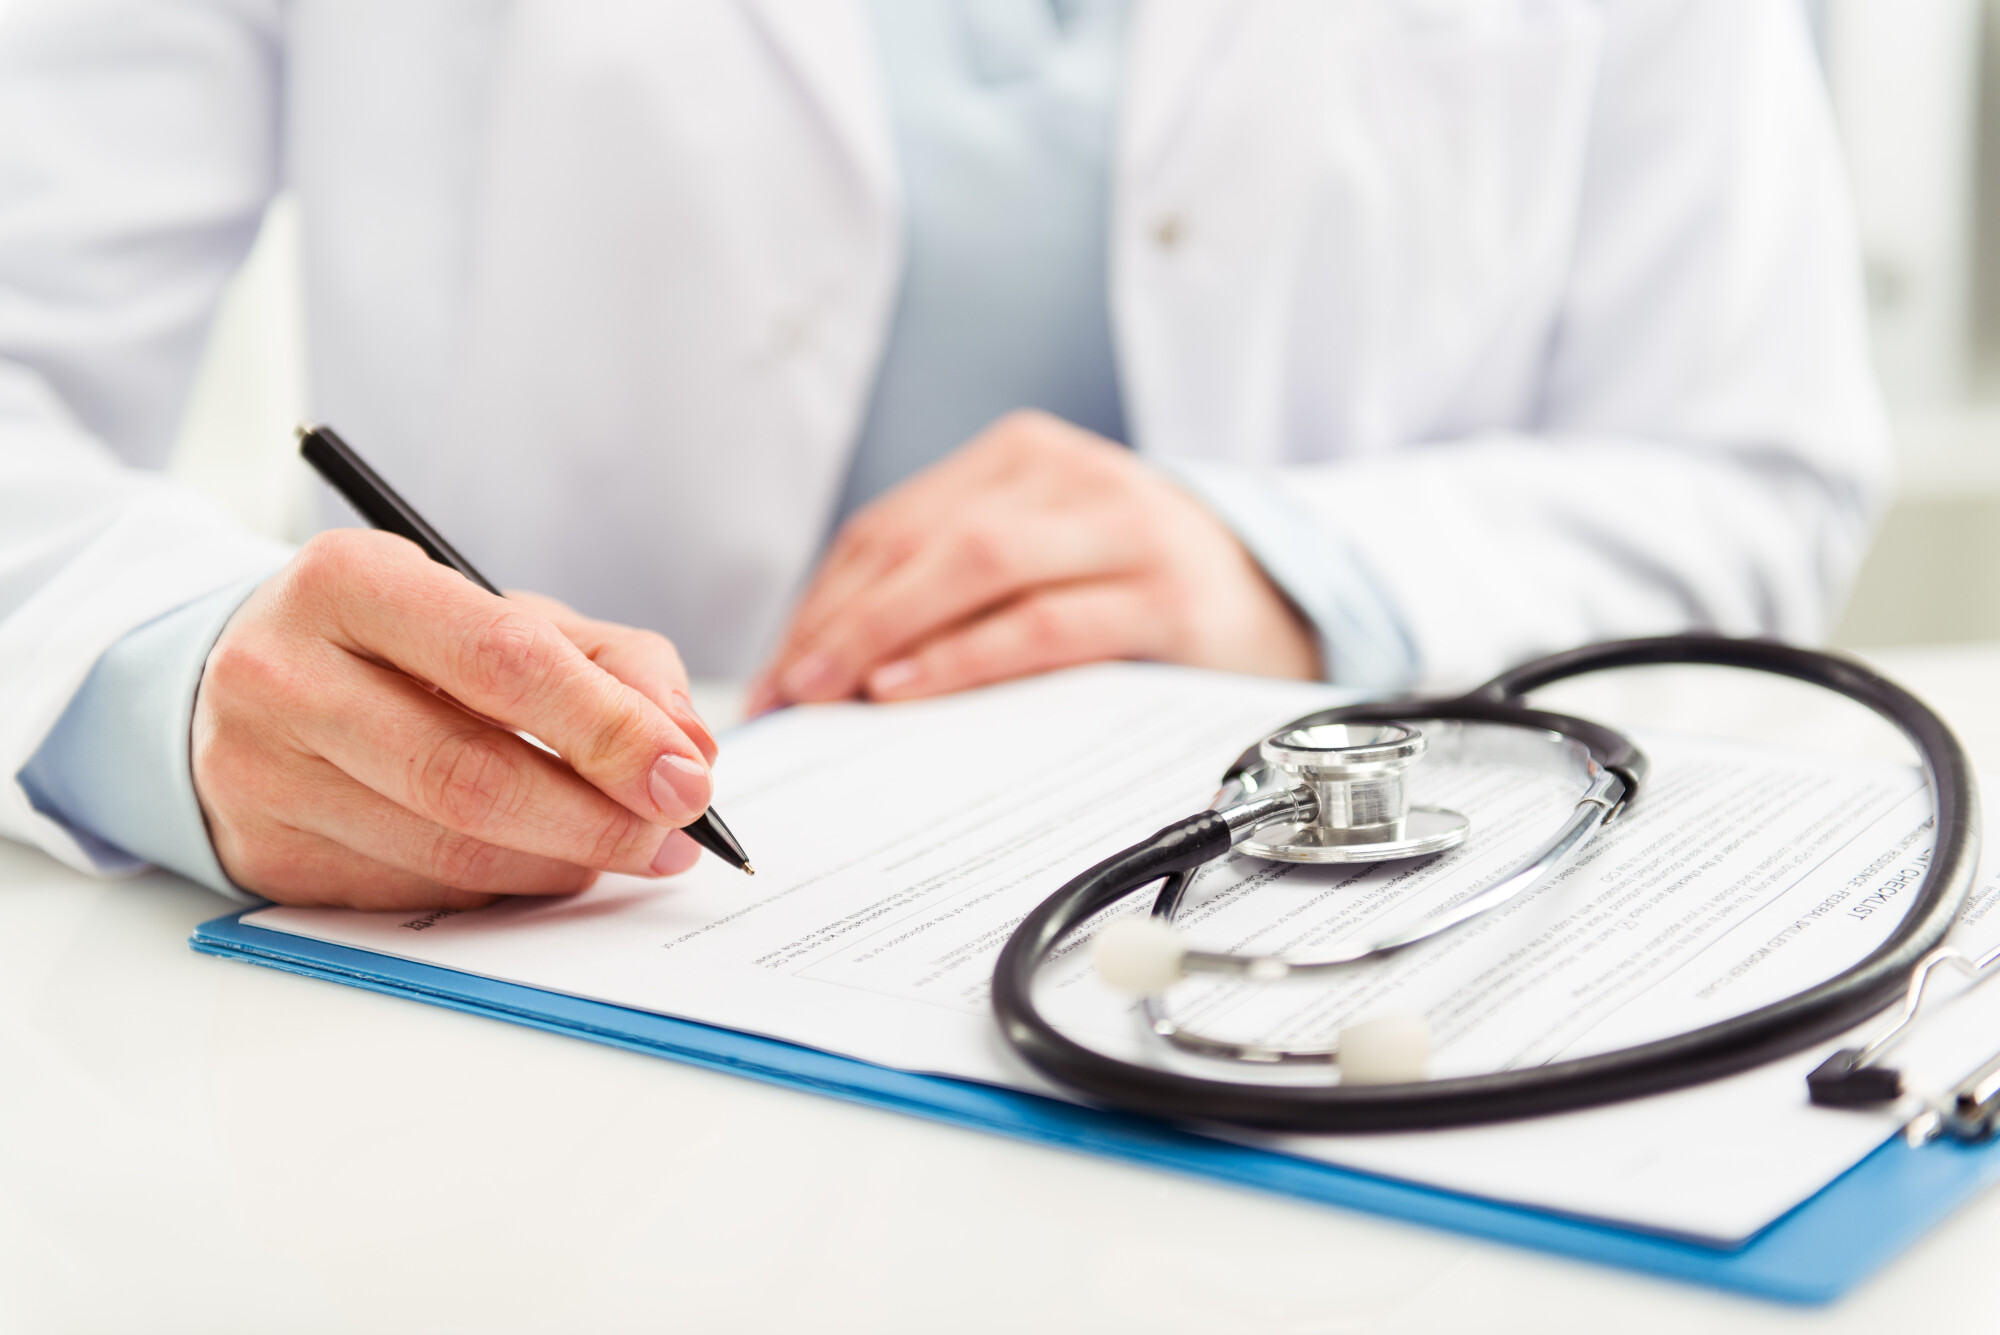 5 Commonly Used Medical Terms in the Medical Field